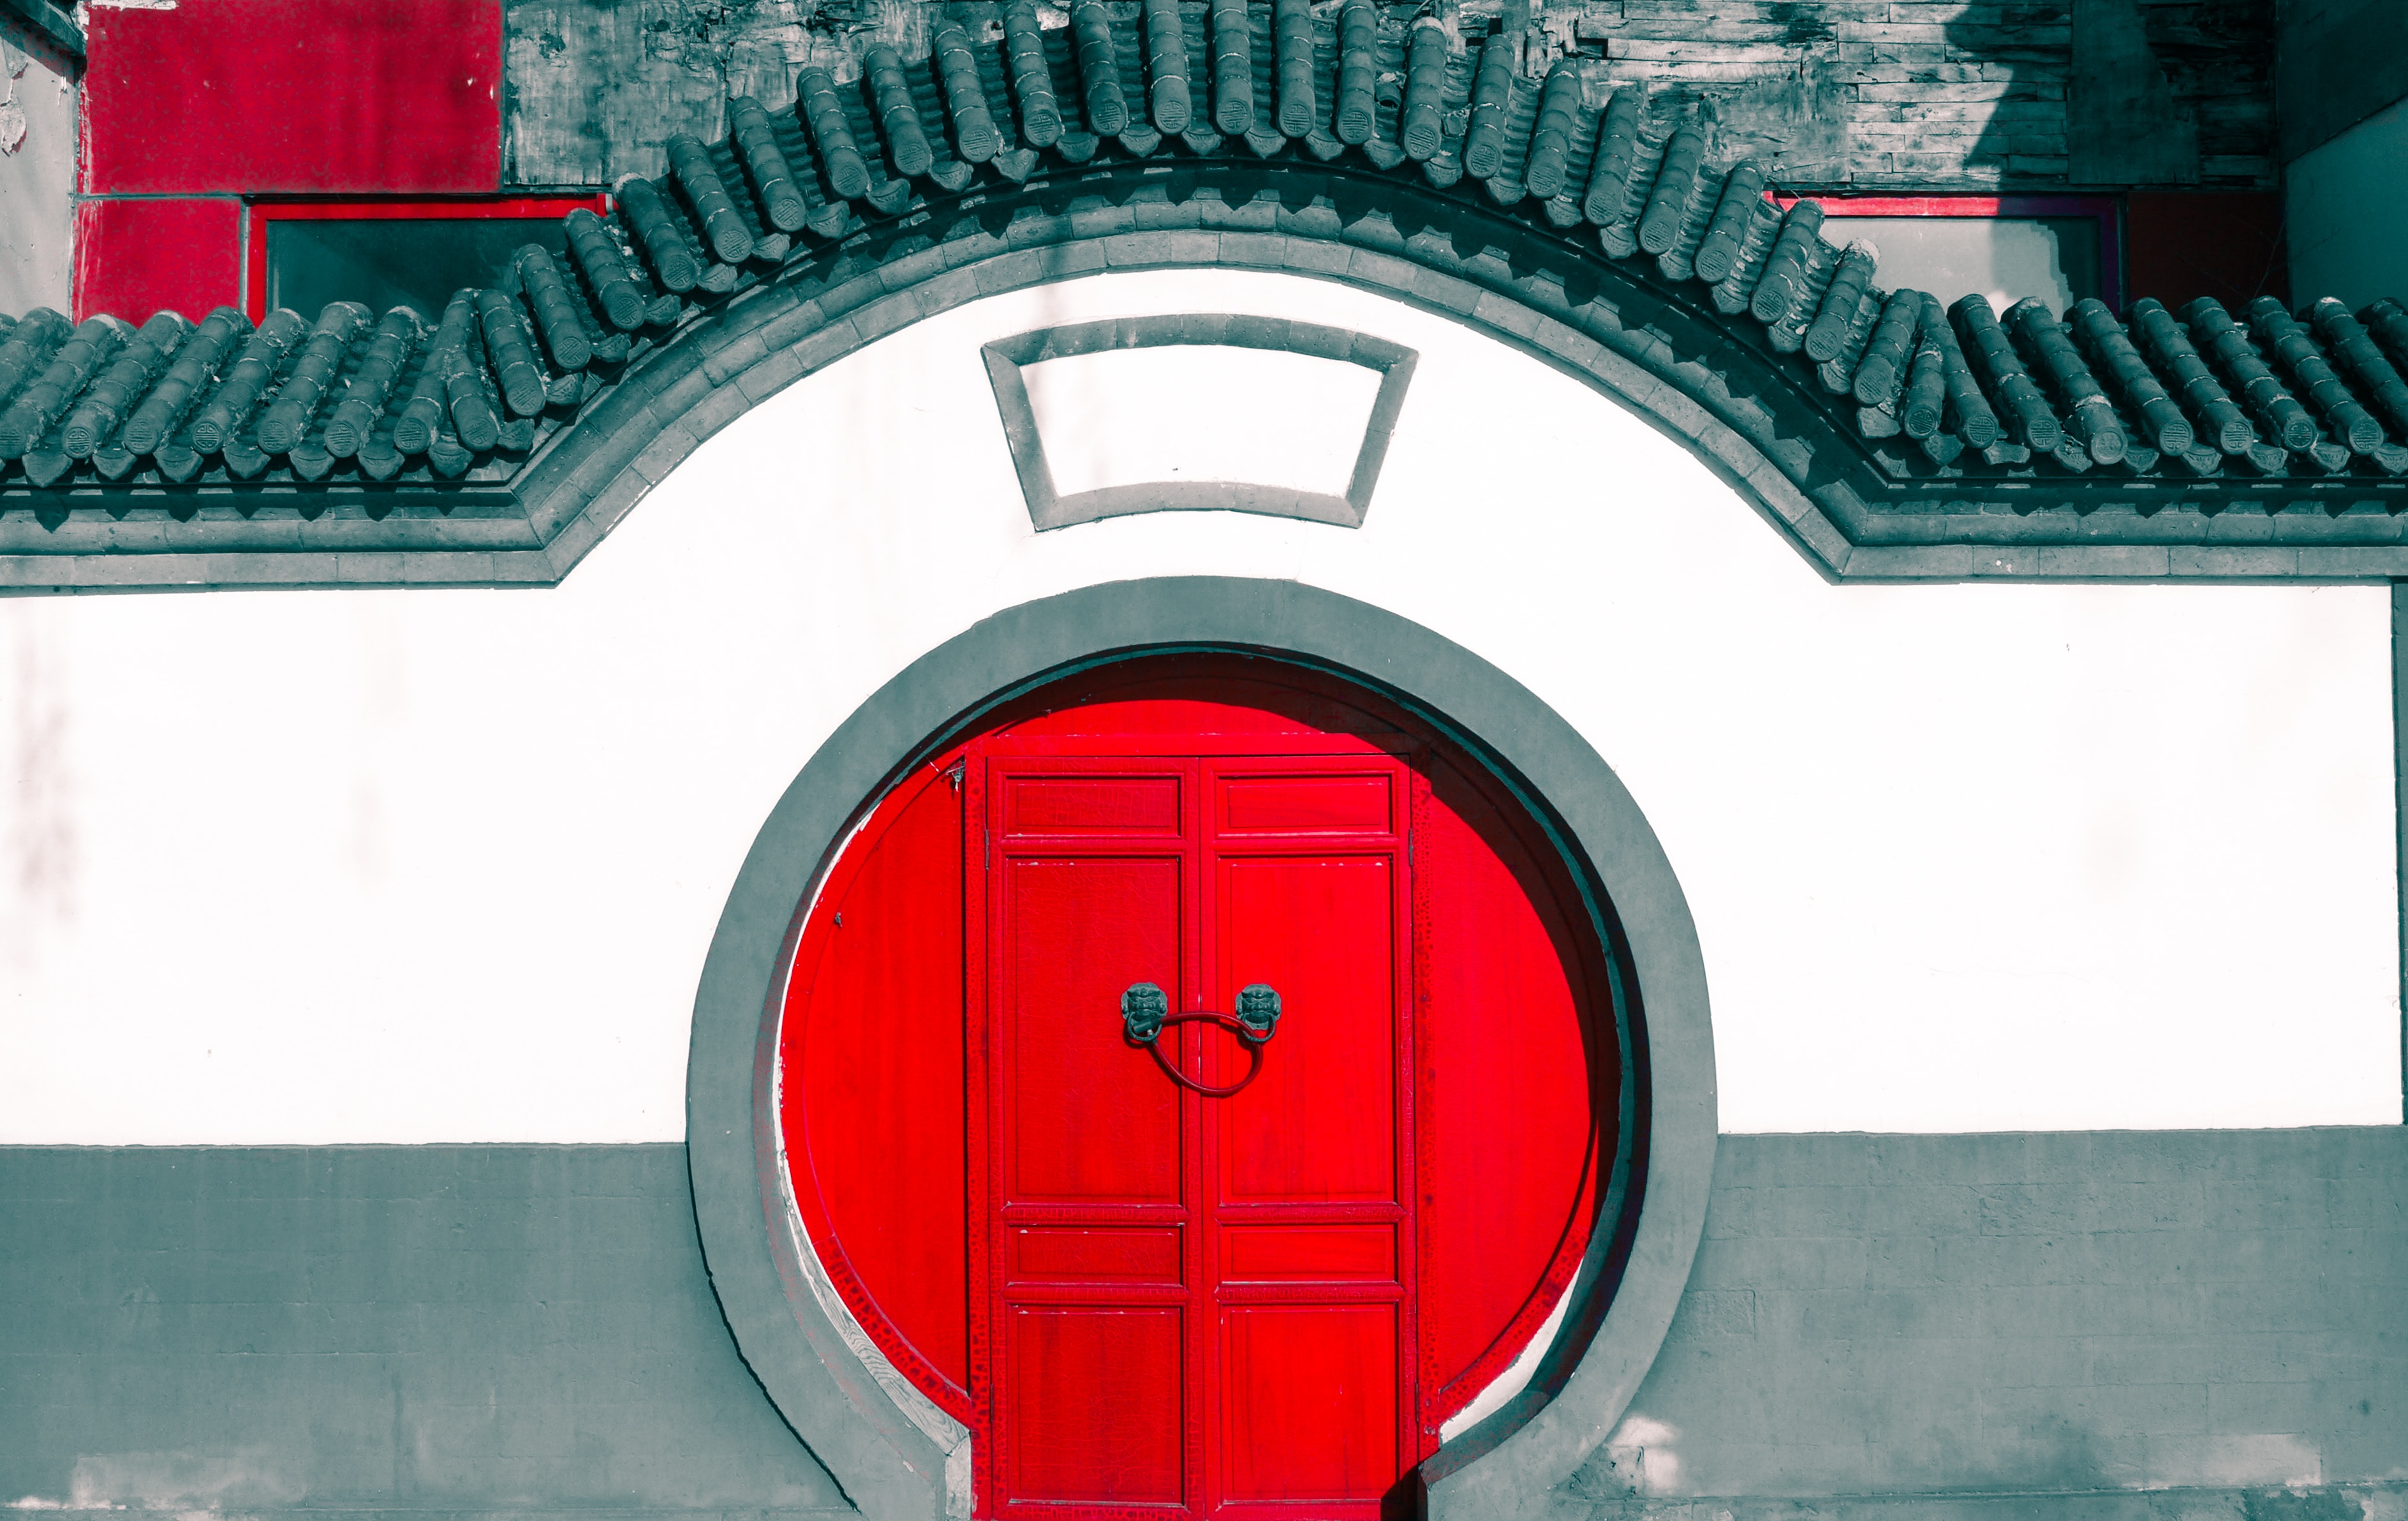 Image of a red door that resembles a red berry.